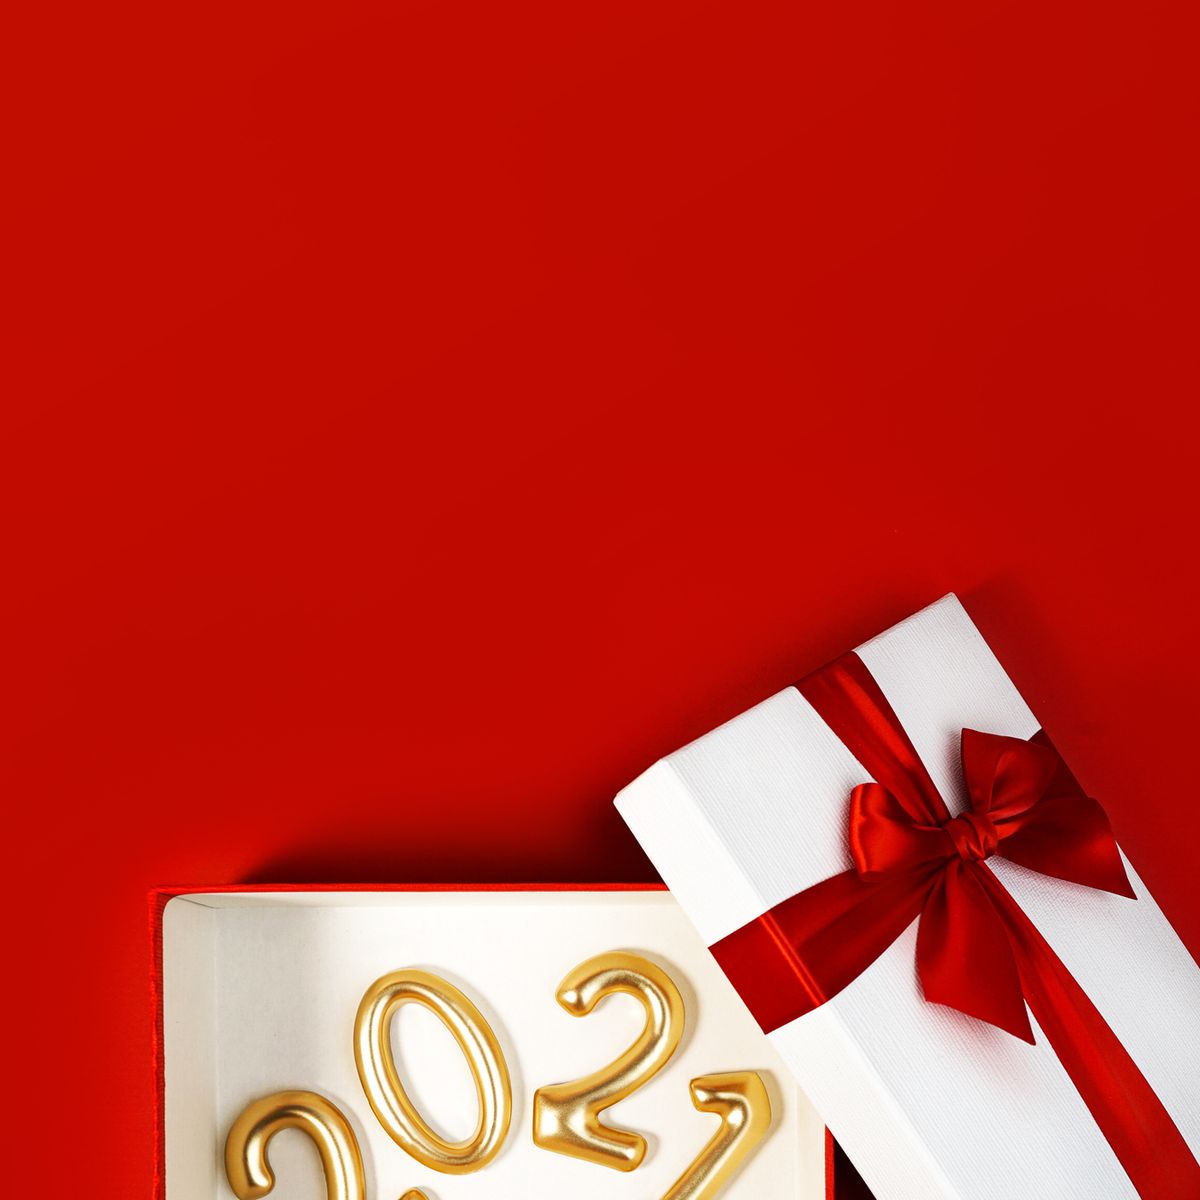 https://hips.hearstapps.com/hmg-prod/images/marry-christmas-and-happy-new-year-2021-concept-royalty-free-image-1605211290.?crop=0.771xw:0.771xh;0.194xw,0.231xh&resize=1200:*